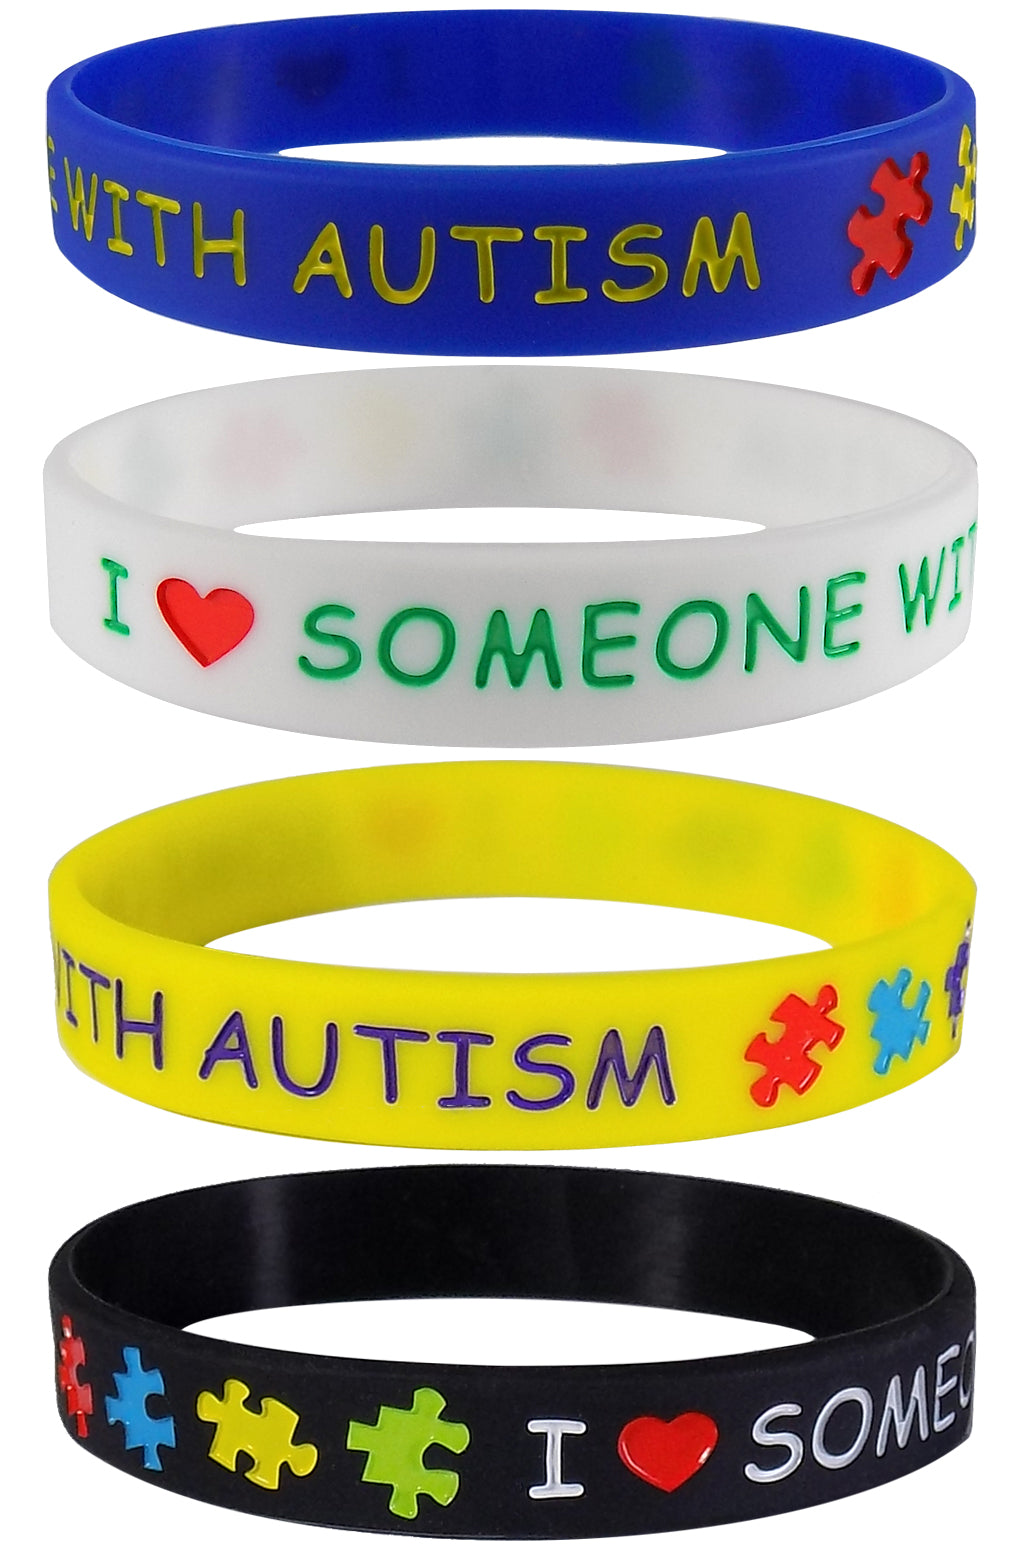 "I Love Someone with Autism" Silicone Bracelets Blue, Yellow, Black and White Adult Size (4 Pack)